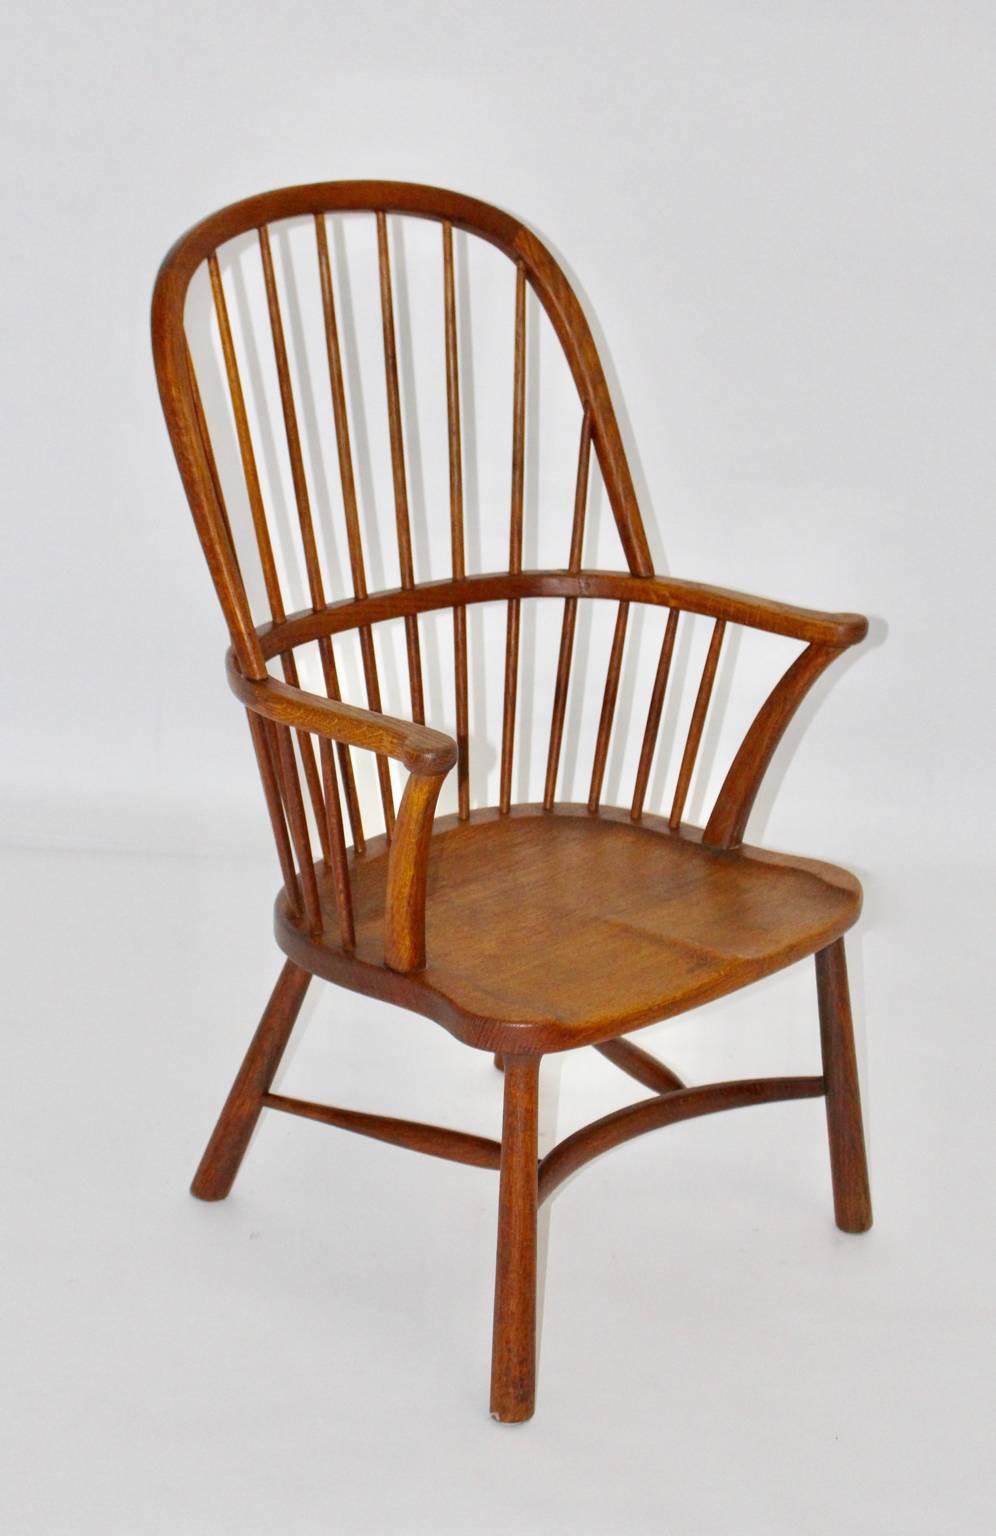 Art Deco Era Windsor chair design attributed to Walter Sobotka Vienna 1932.
The WIndsor chair from solid oakwood features a saddle seat and conical feet. 

Walter Sobotka (1888 Vienna - 1972 New York) has a leading position in 1929 and also from